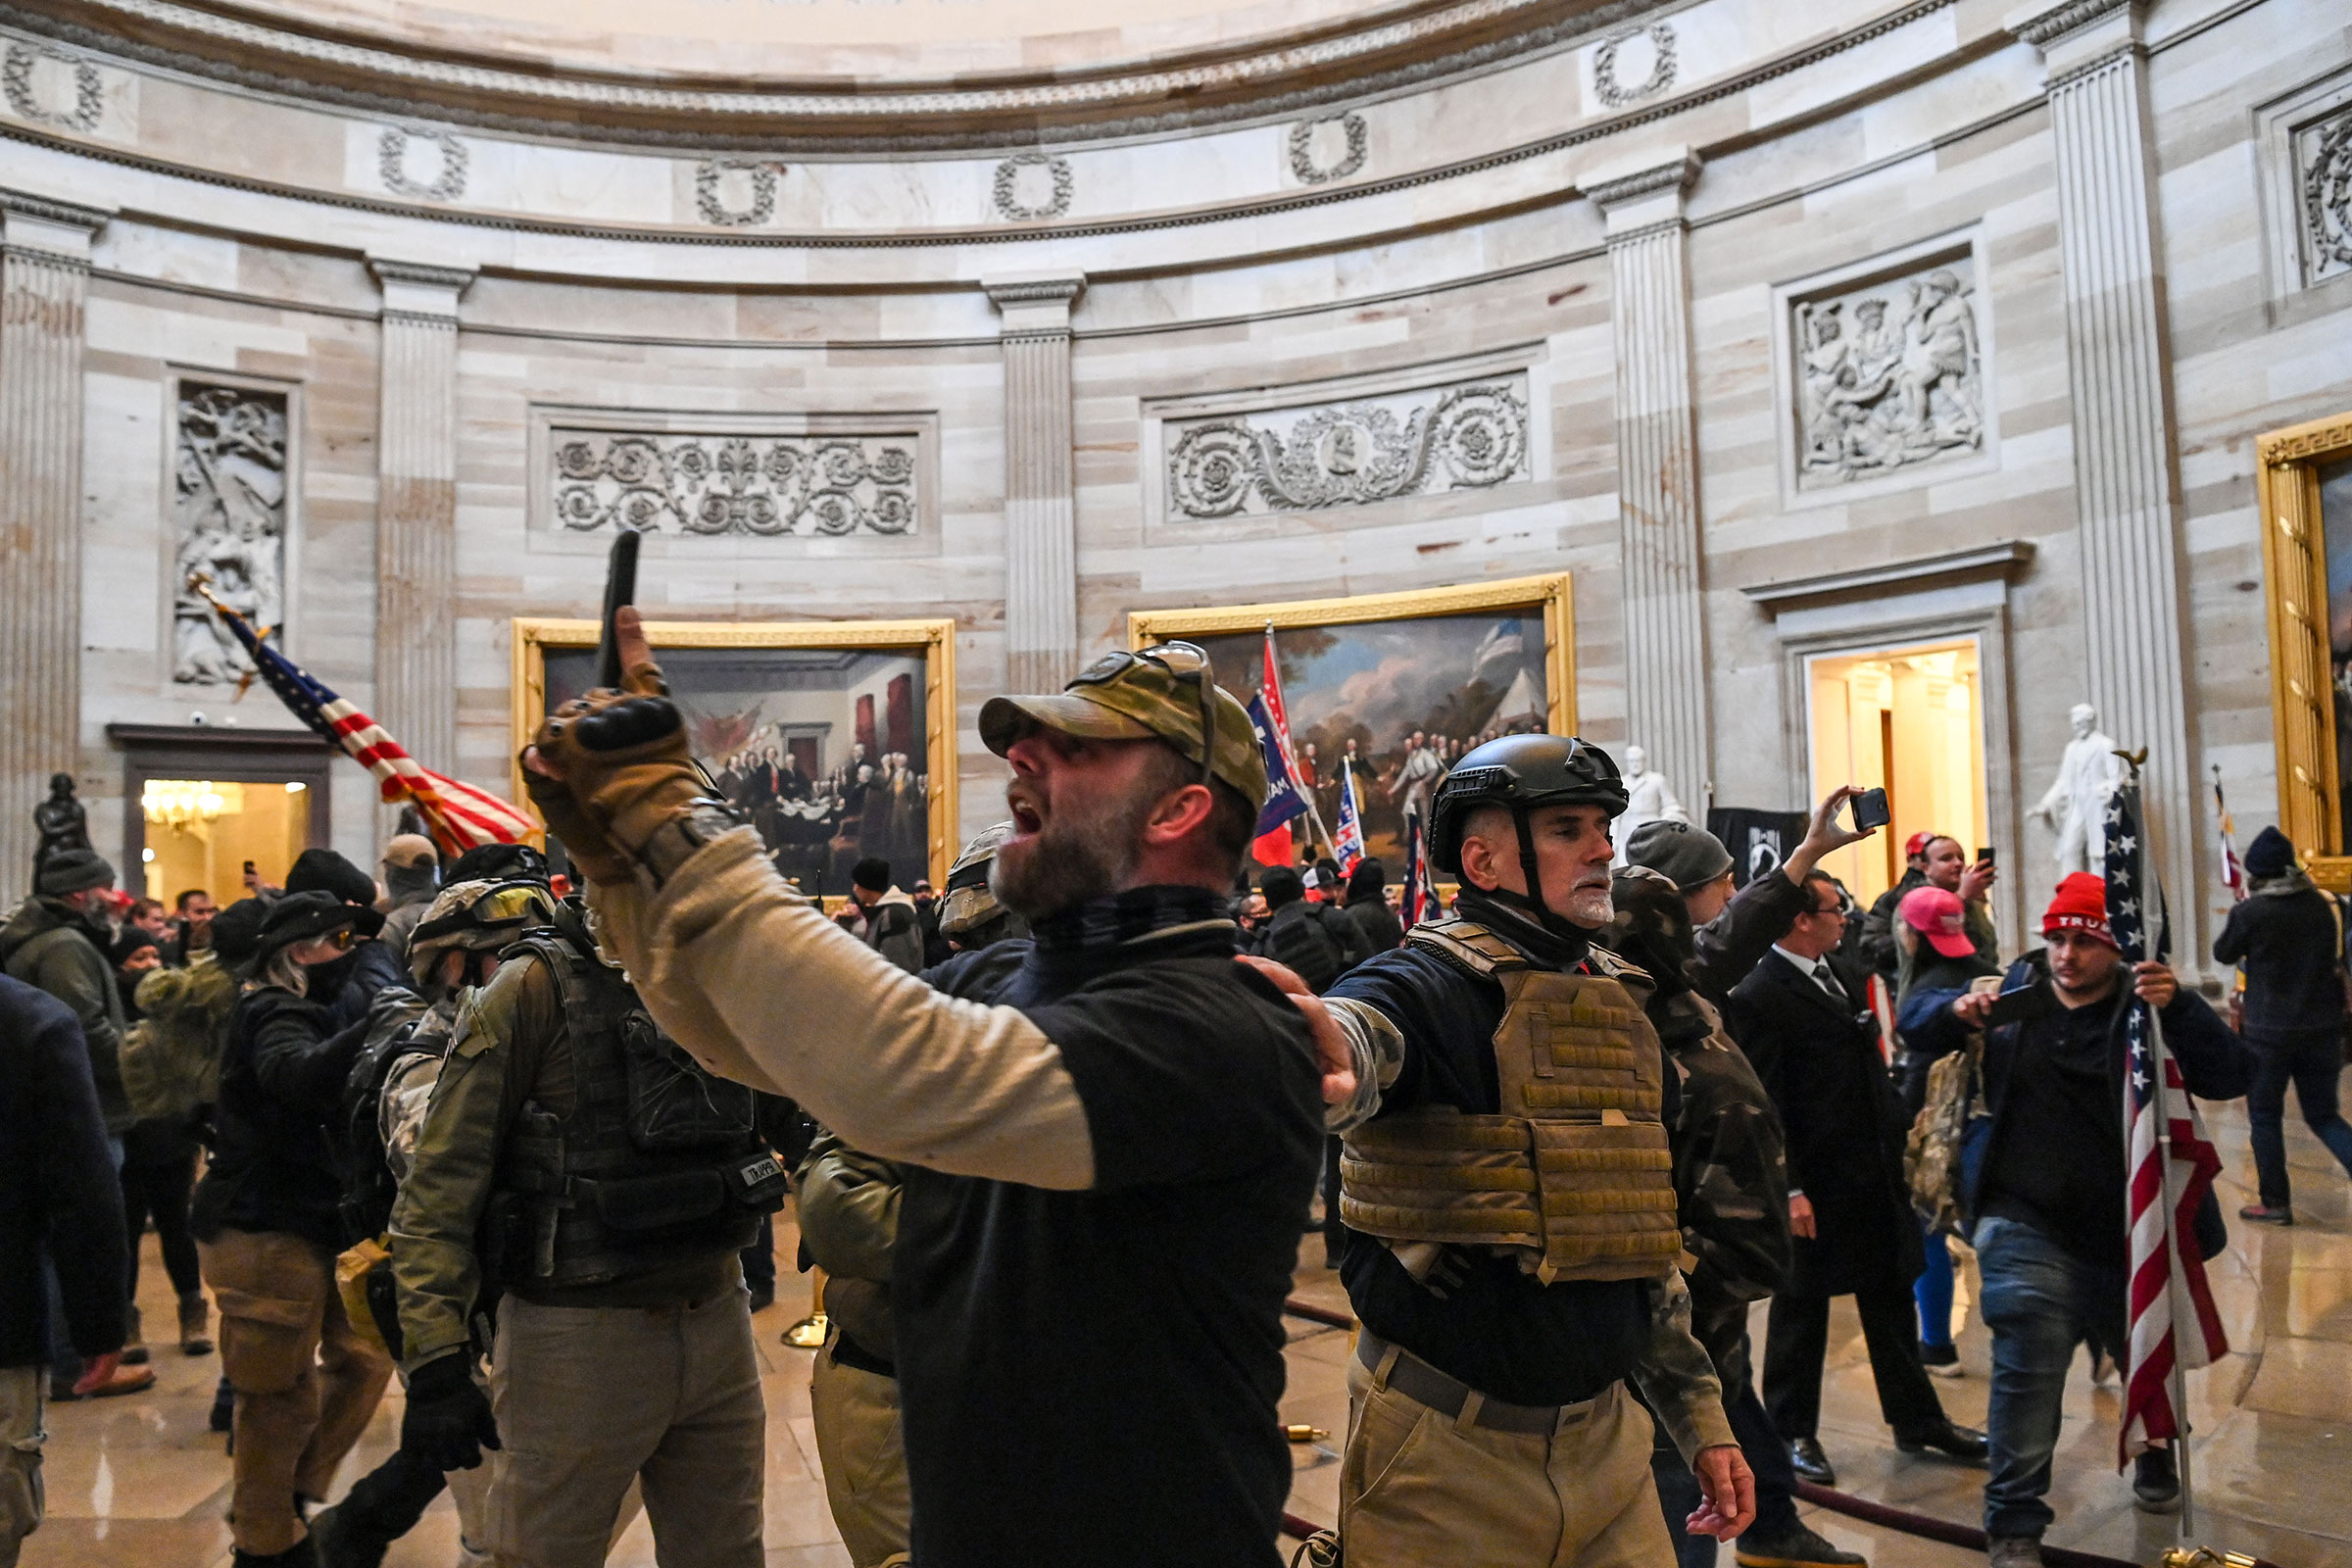 Supporters of President Donald Trump in the US Capitol's Rotunda after breeching police barriers in Washington, DC, on Jan. 6, 2021. (Saul Loeb—AFP/Getty Images)